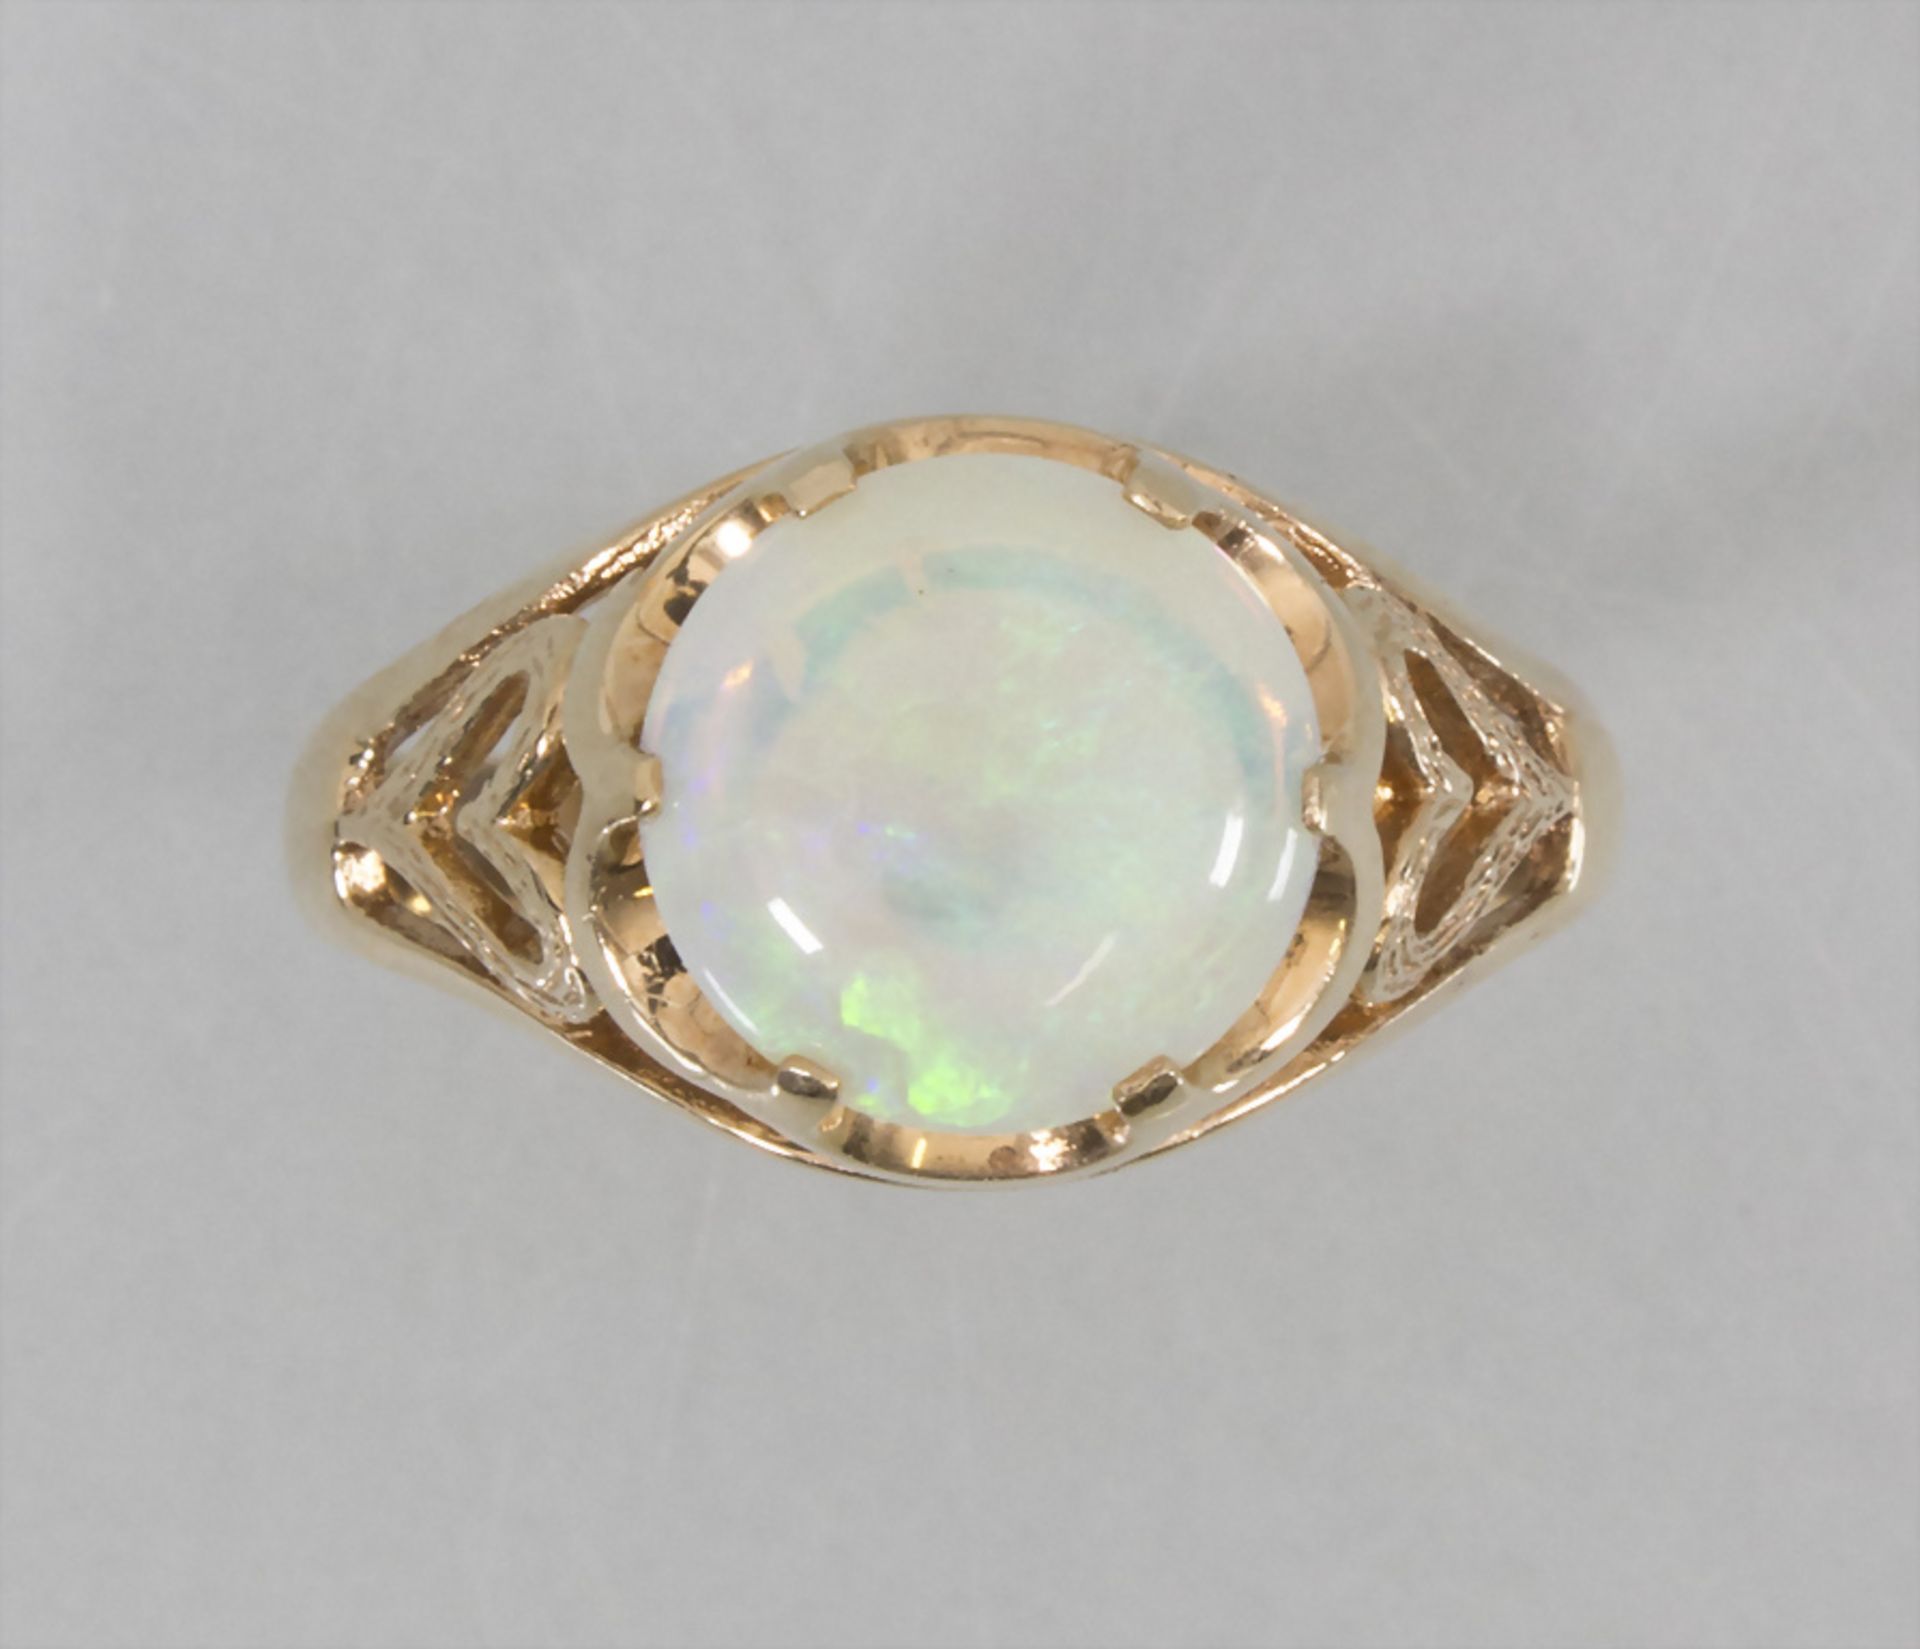 Damenring mit Opal / A ladies 14k gold ring with an opal